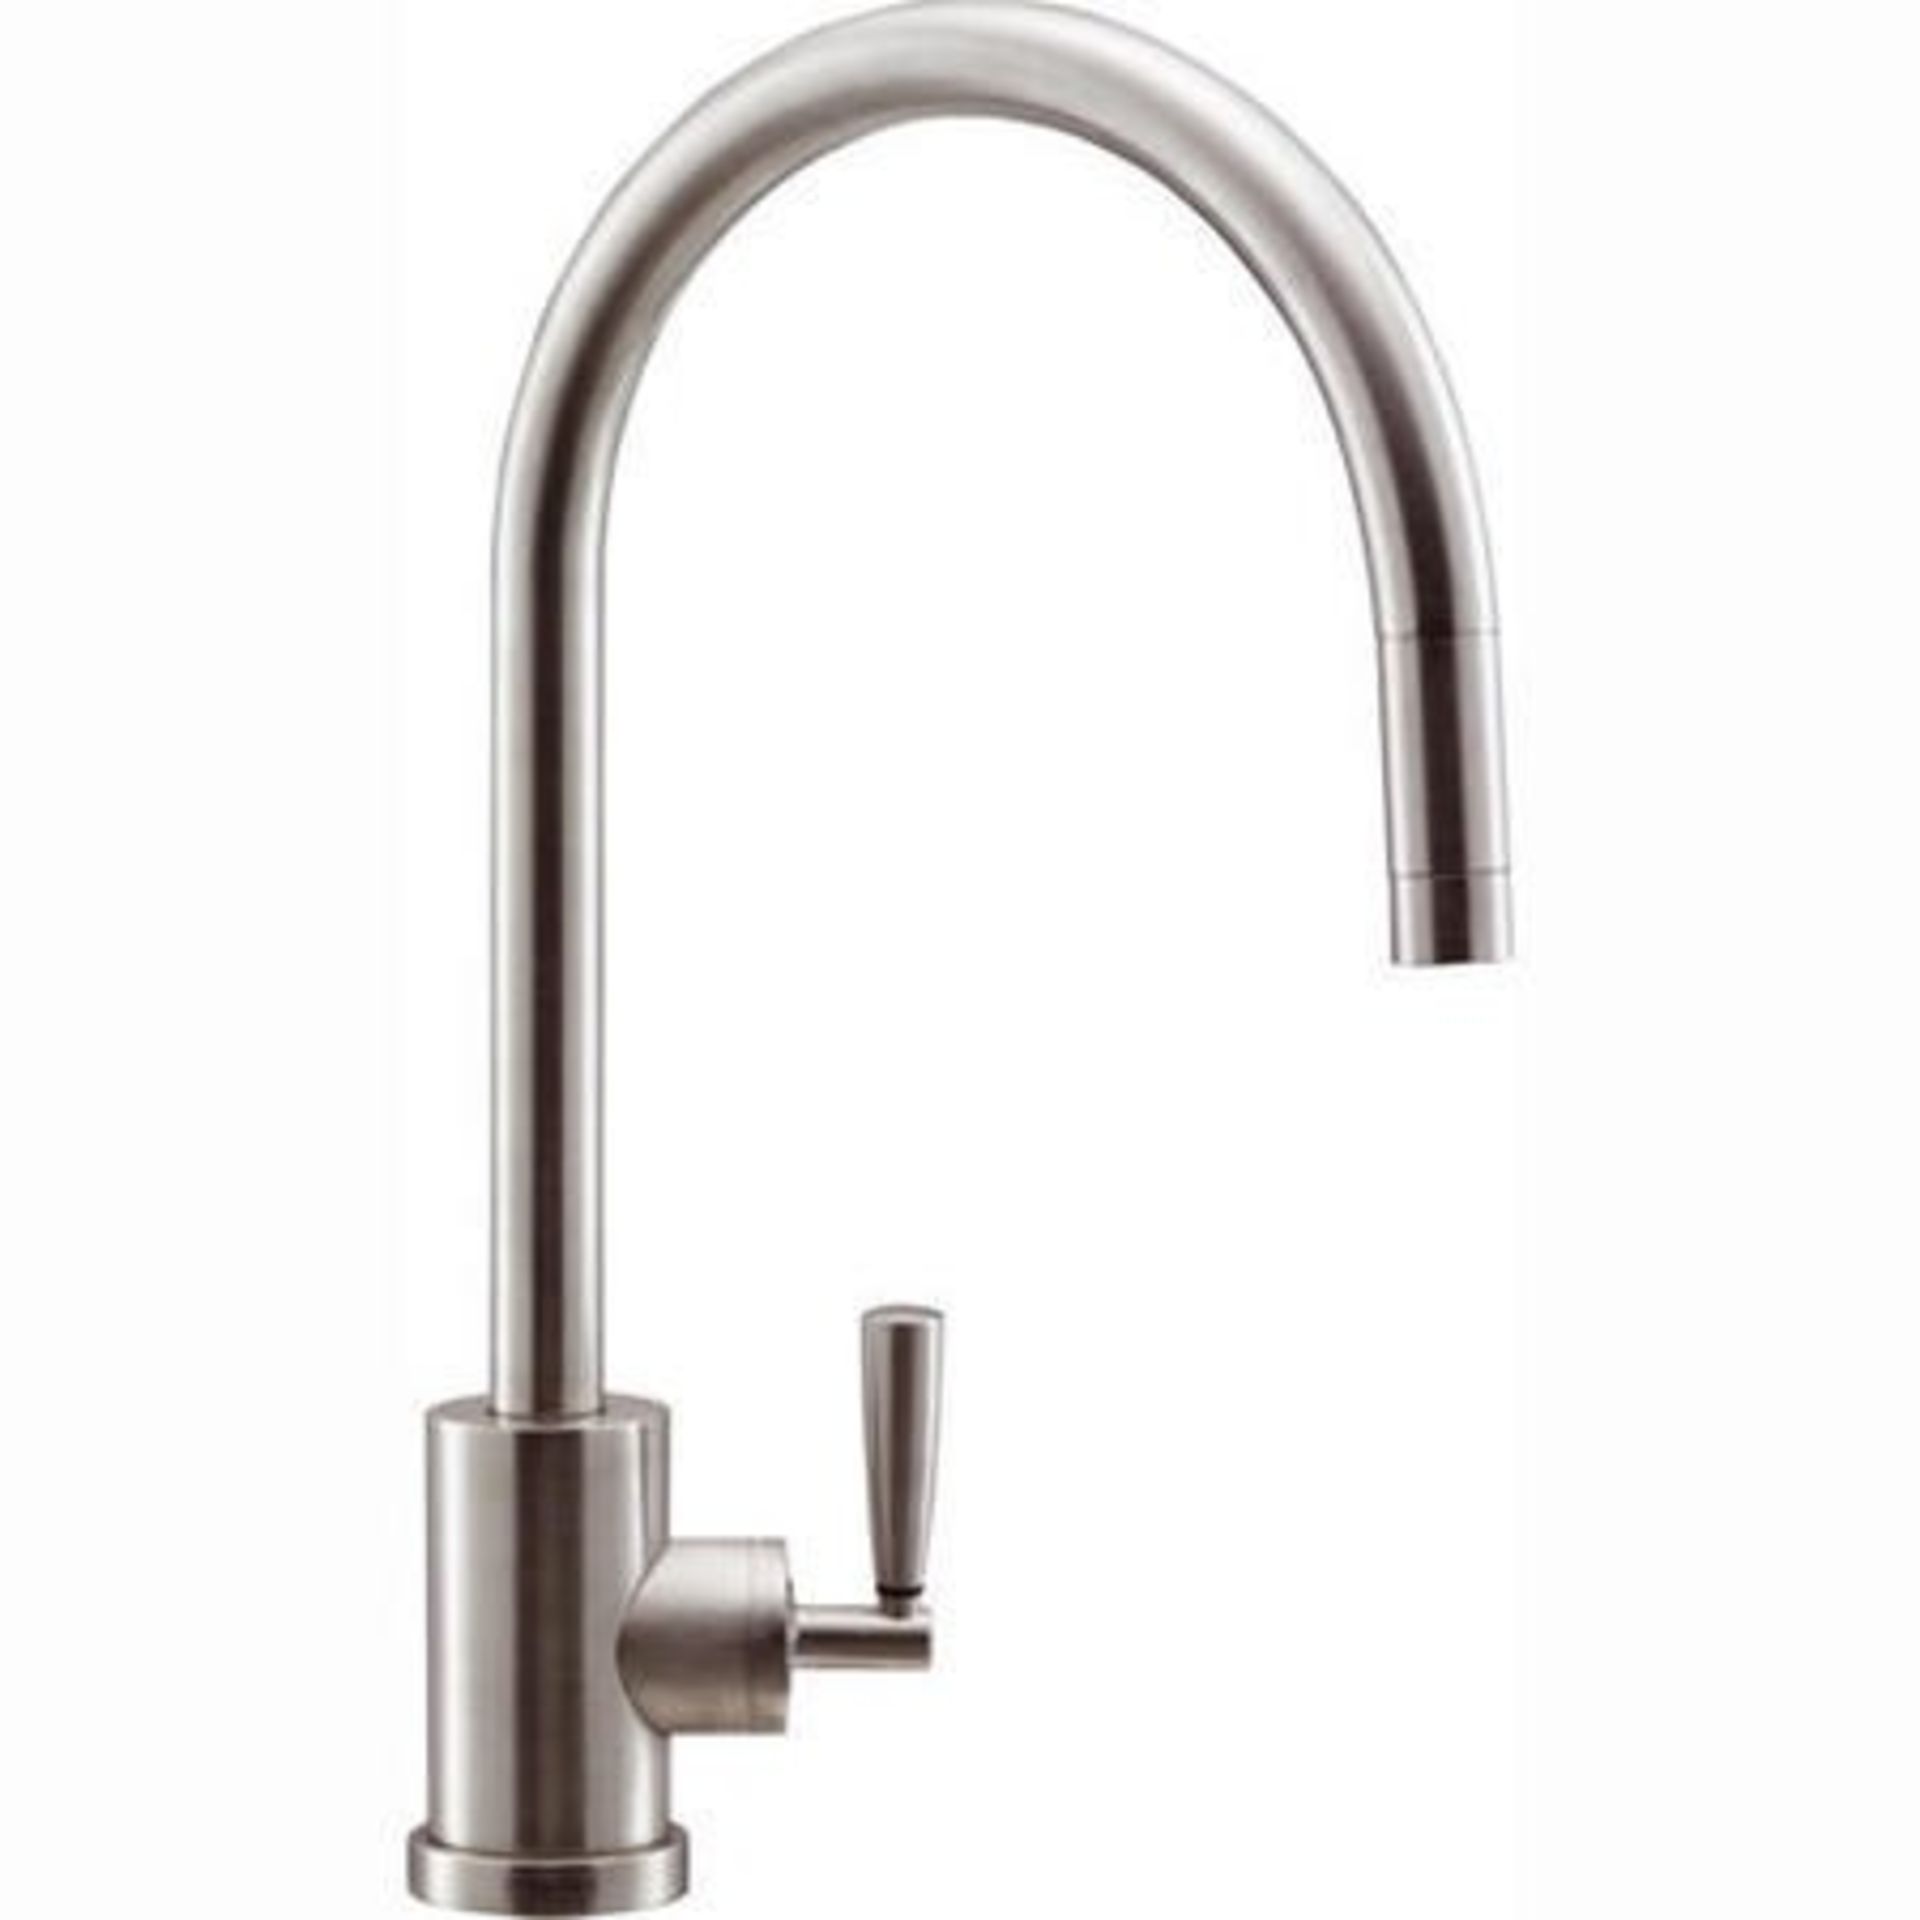 (EX82) NEW FRANKE FUJI PULL OUT NOZZLE KITCHEN TAP SILKSTEEL. Contemporary single flow tap Pul...